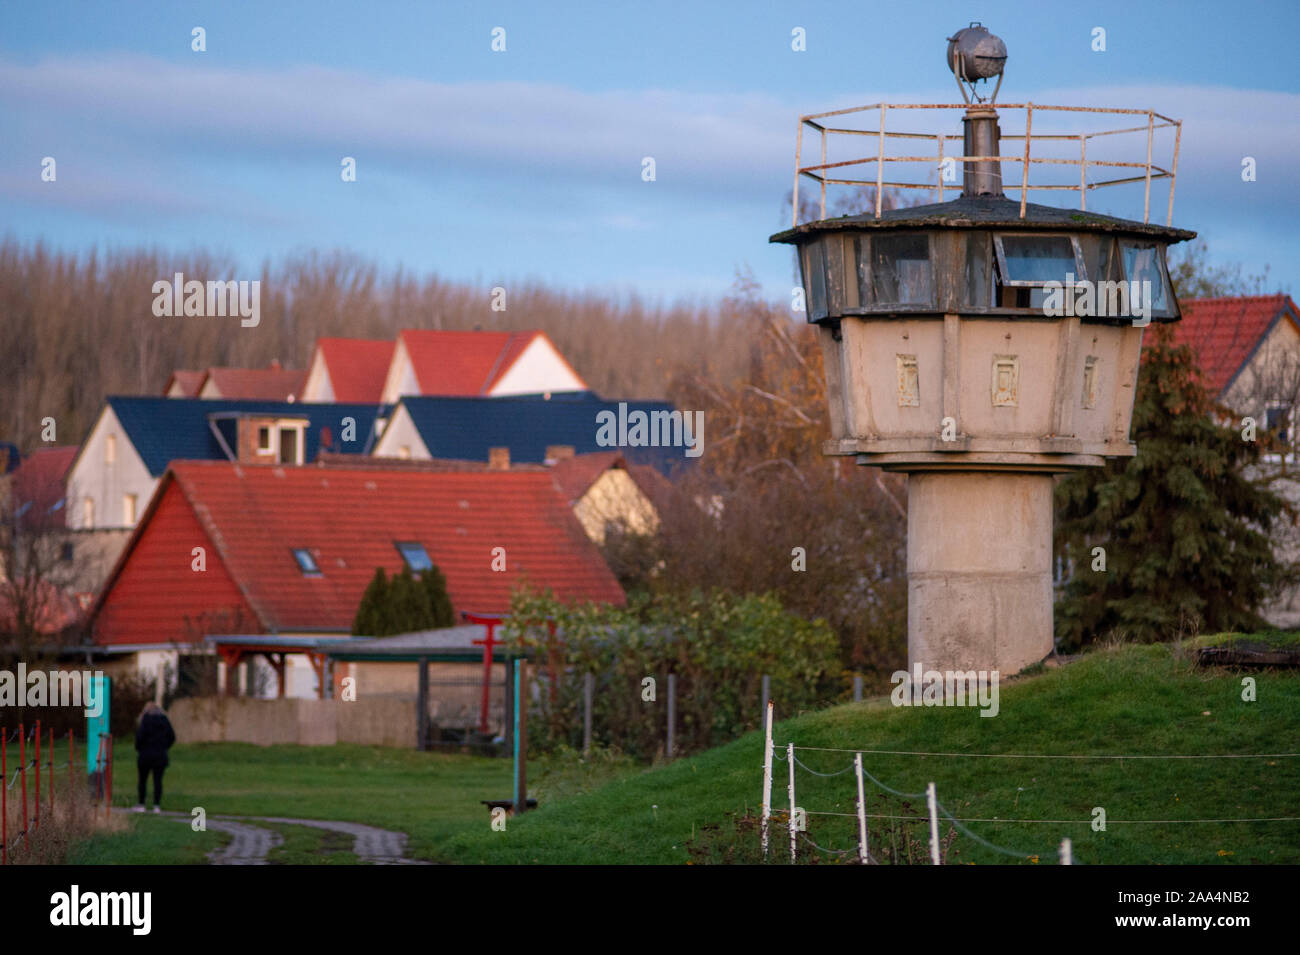 19 November 2019, Saxony-Anhalt, Hötensleben: A watchtower of the former inner-German border. In the background you can see houses of the village. Today the border buildings are part of the Hötensleben border museum. In the evening there was a party to celebrate the 30th anniversary of the opening of the border. The organisers were the Protestant parish of Hötensleben and the Grenzdenkmalverein Hötensleben. Photo: Klaus-Dietmar Gabbert/dpa-Zentralbild/dpa Stock Photo